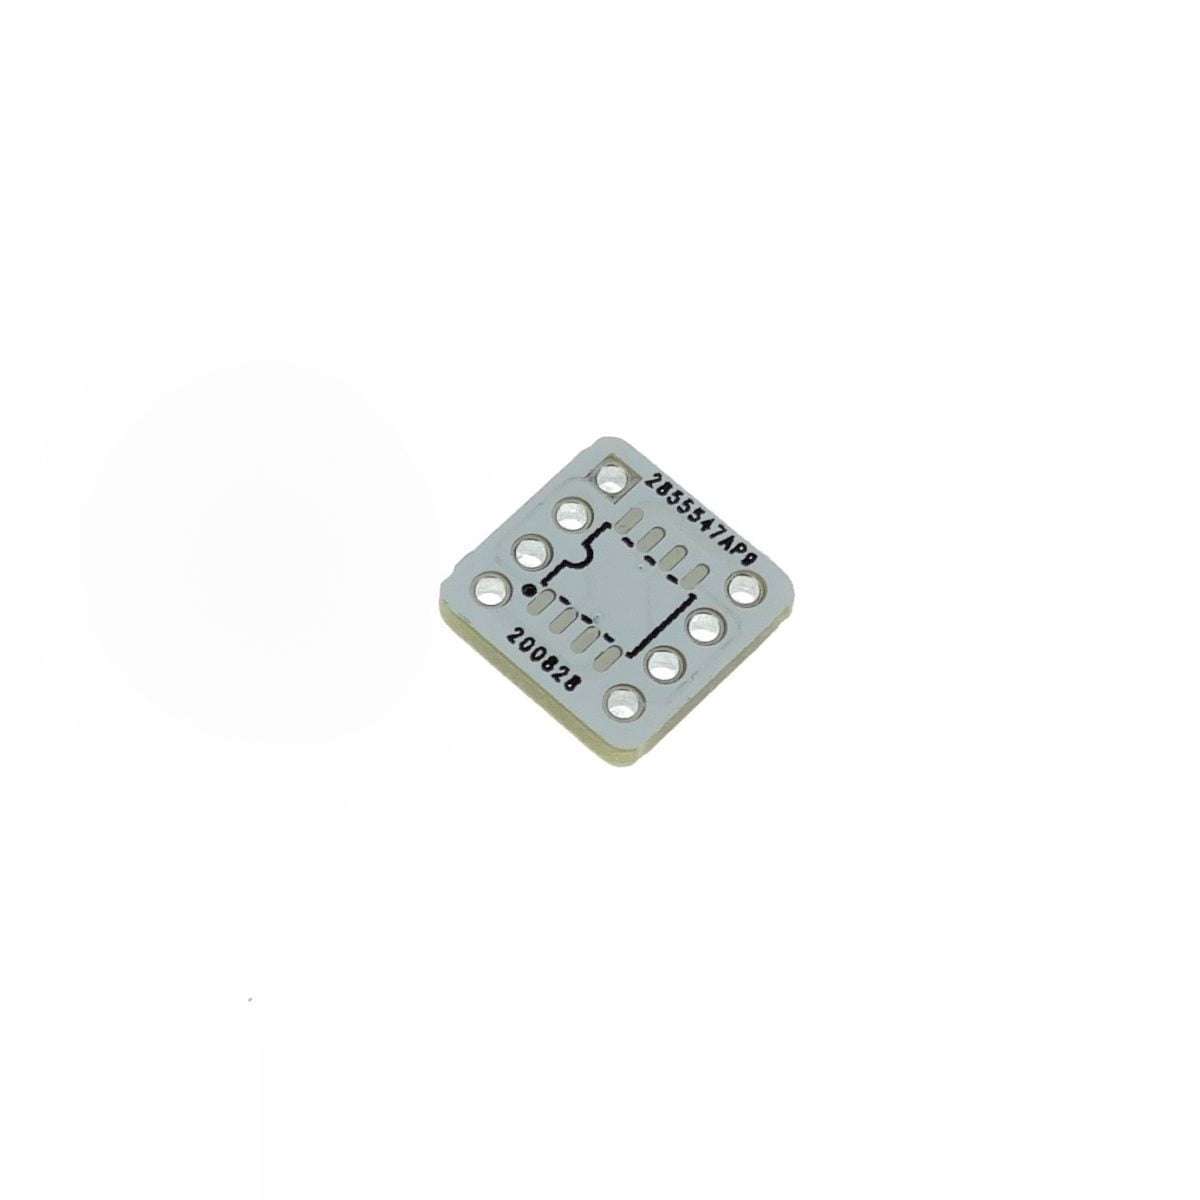 SOIC8 to DIP8 Adapter PCB [10pcs.] on a white background